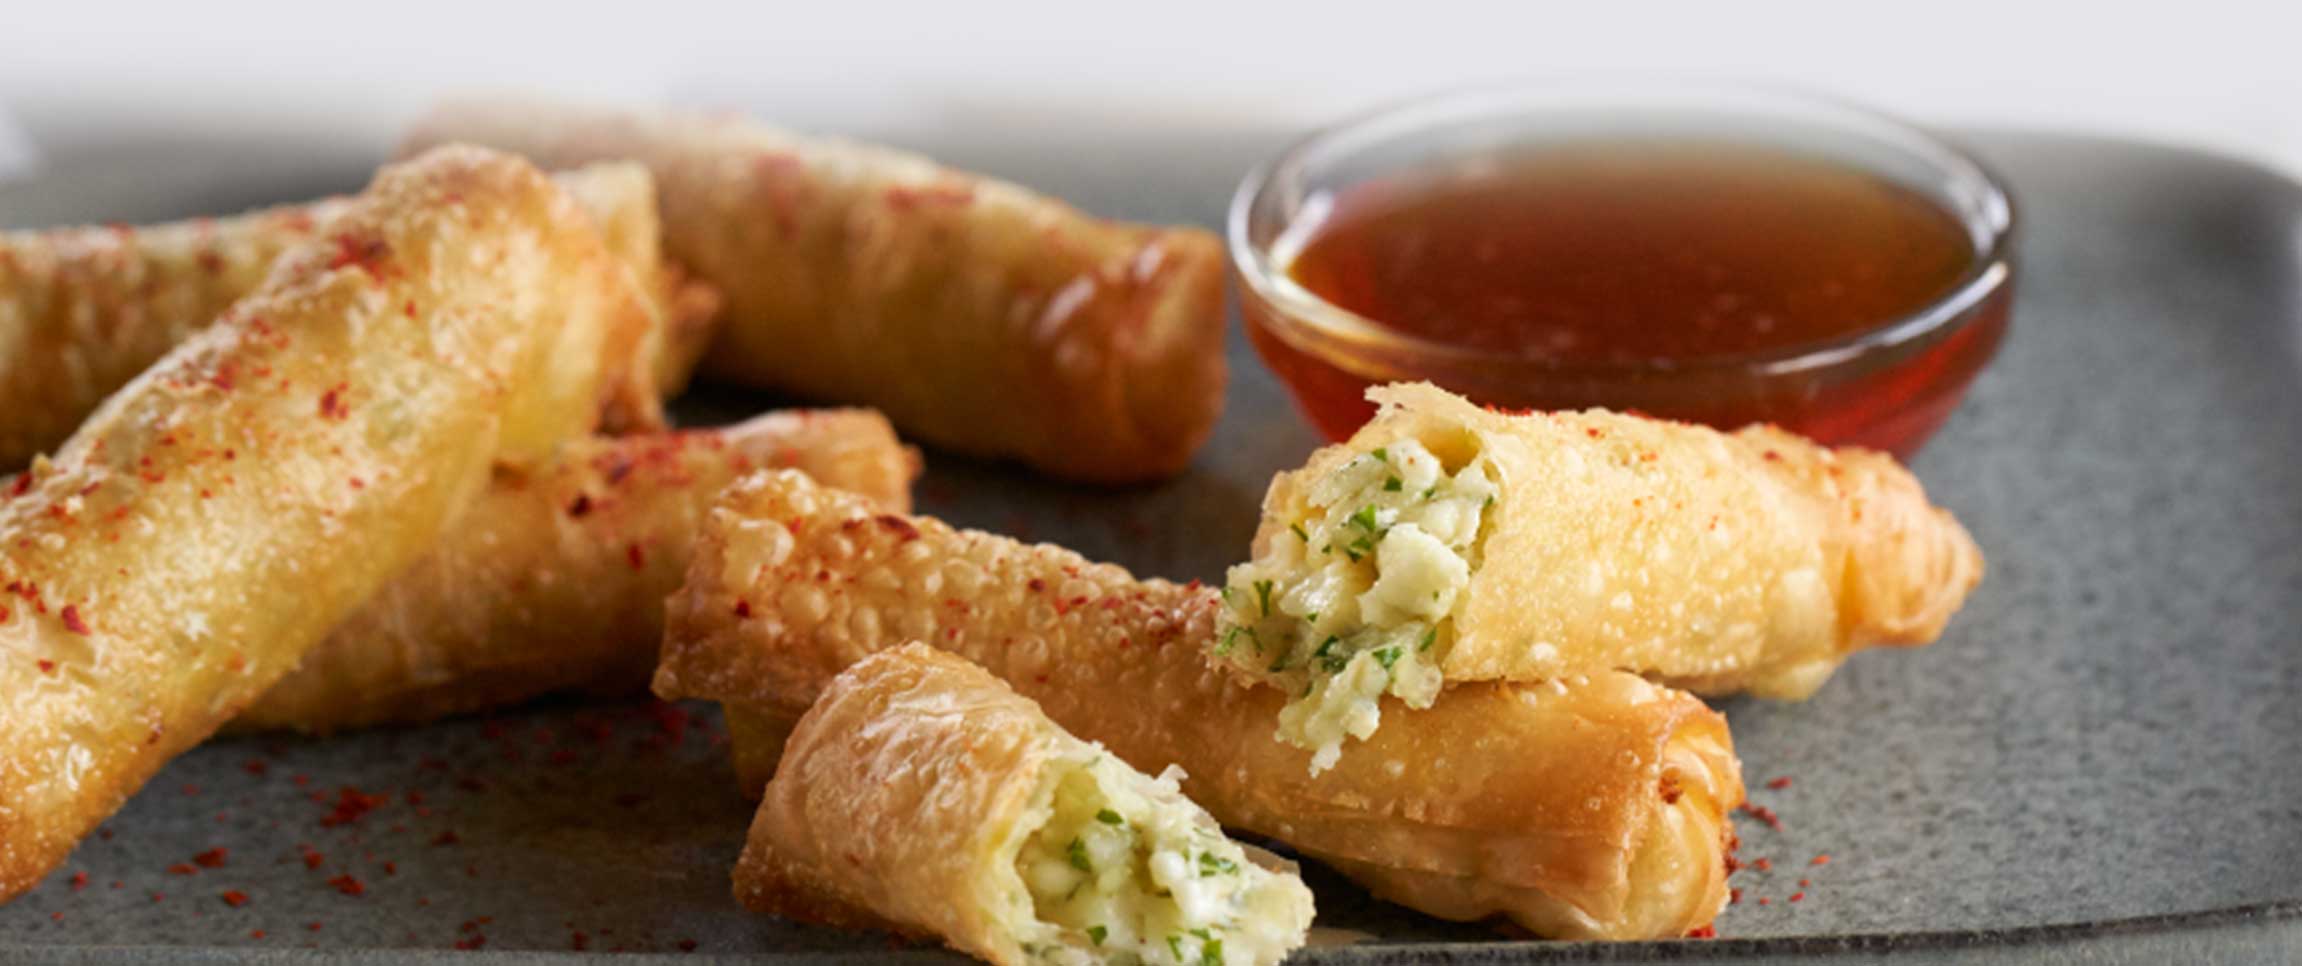 Cheese Cigars with Dipping Sauce